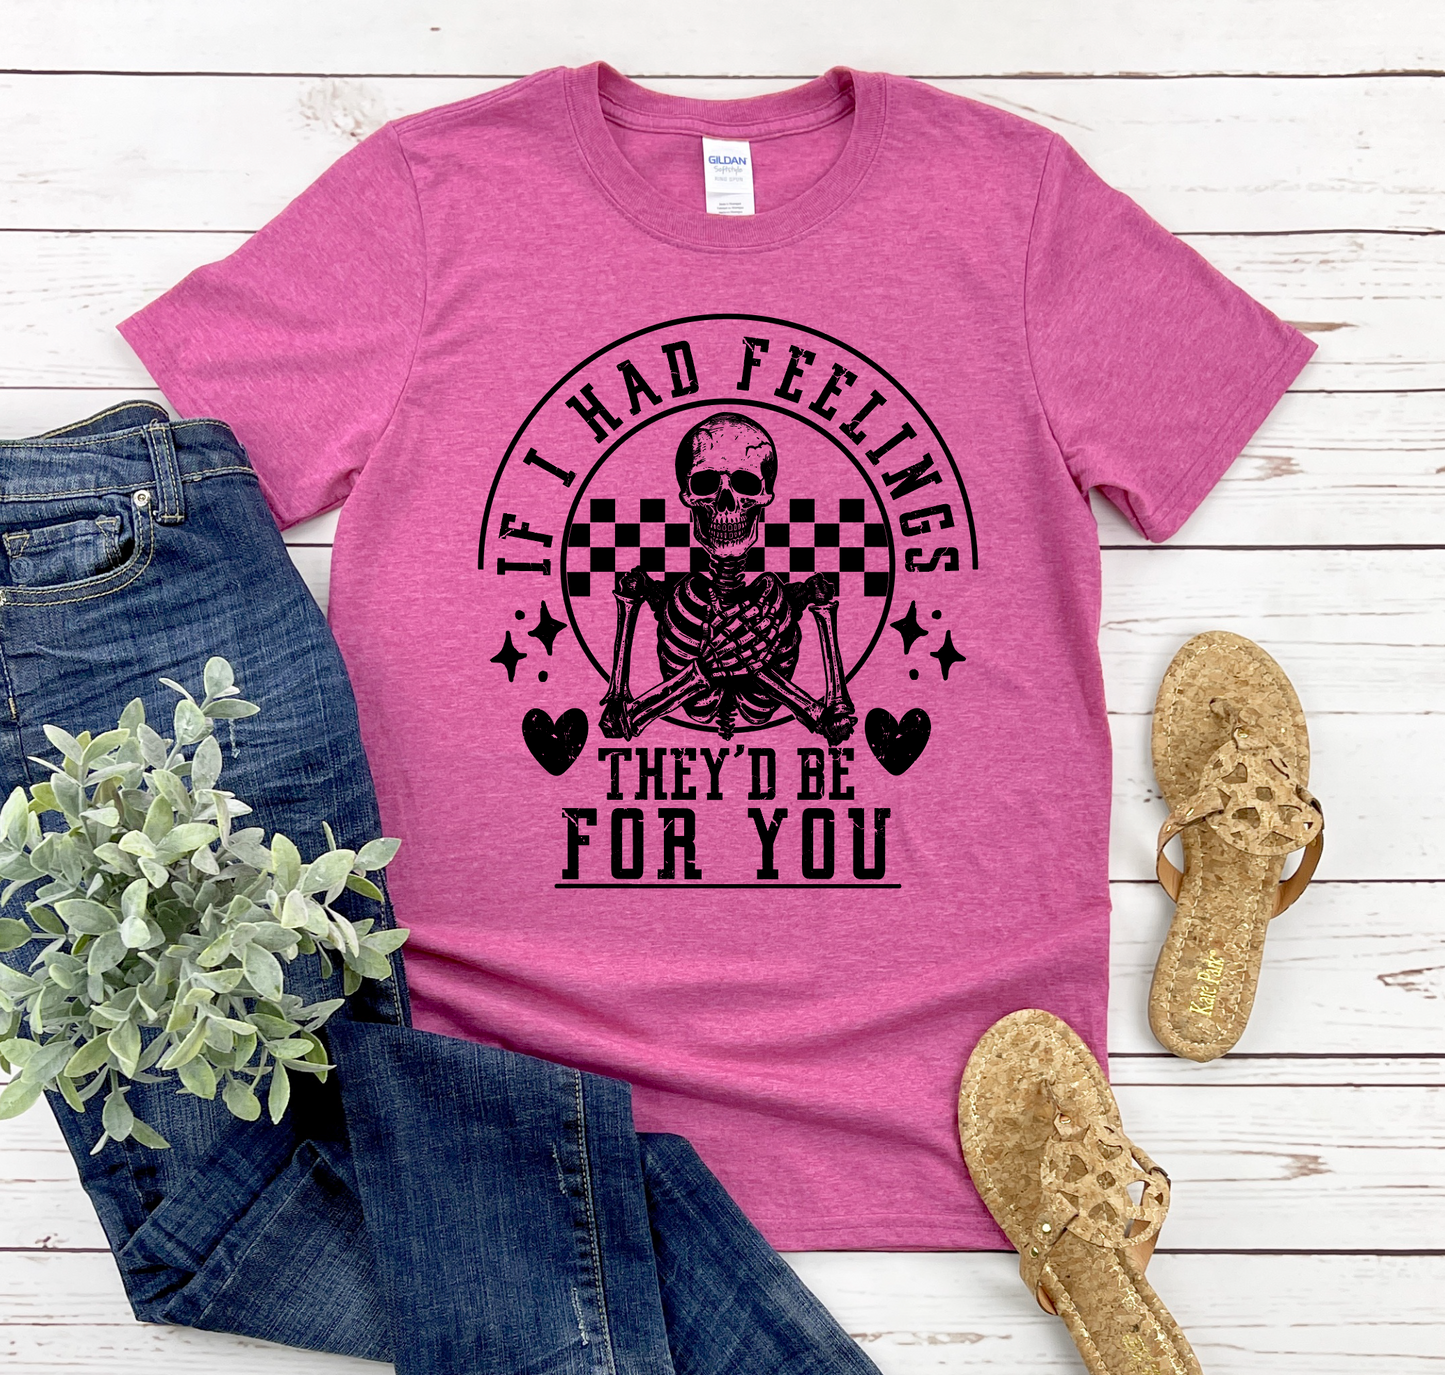 If I Had Feelings They'd Be For You Graphic Tee